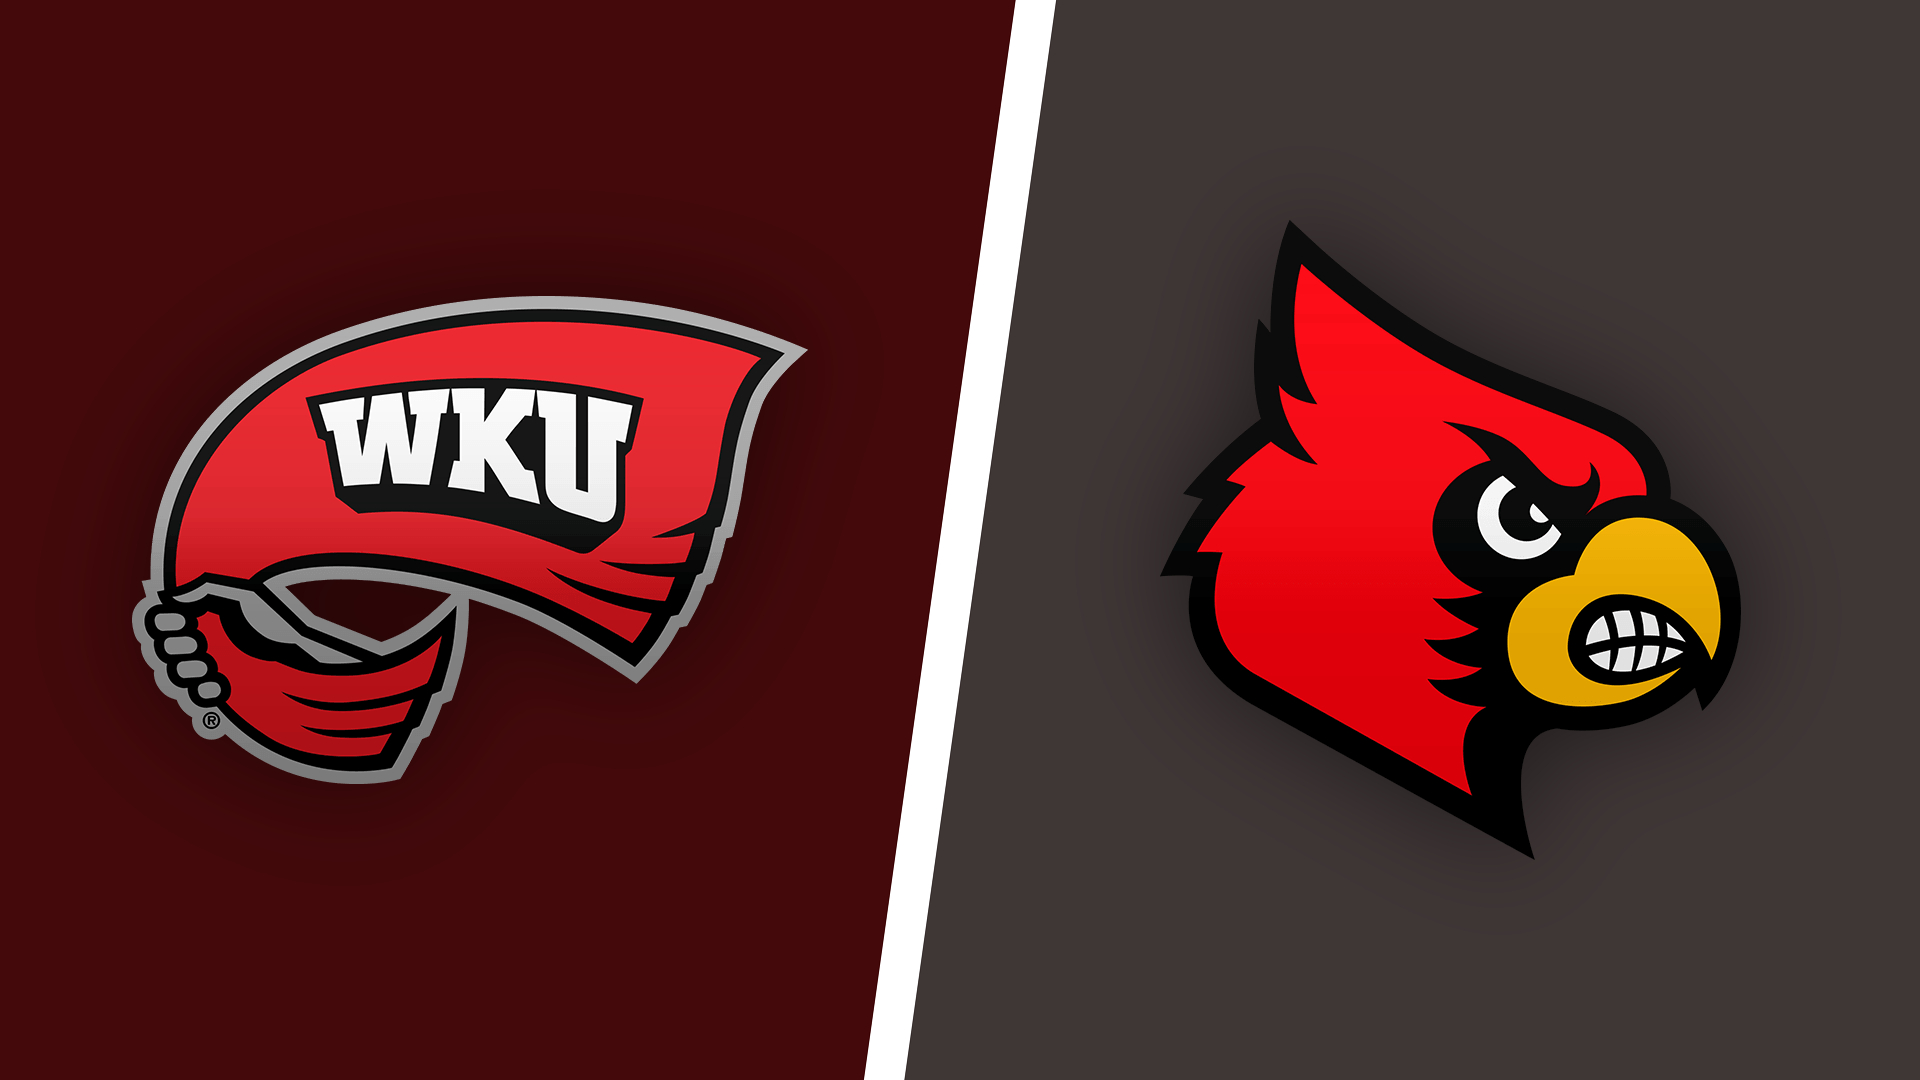 1920x1080 How to Stream Western Kentucky at Louisville: Live Stream ACC Network on Apple TV, Roku, Fire TV, \u0026 Android &acirc;&#128;&#147; The Streamable